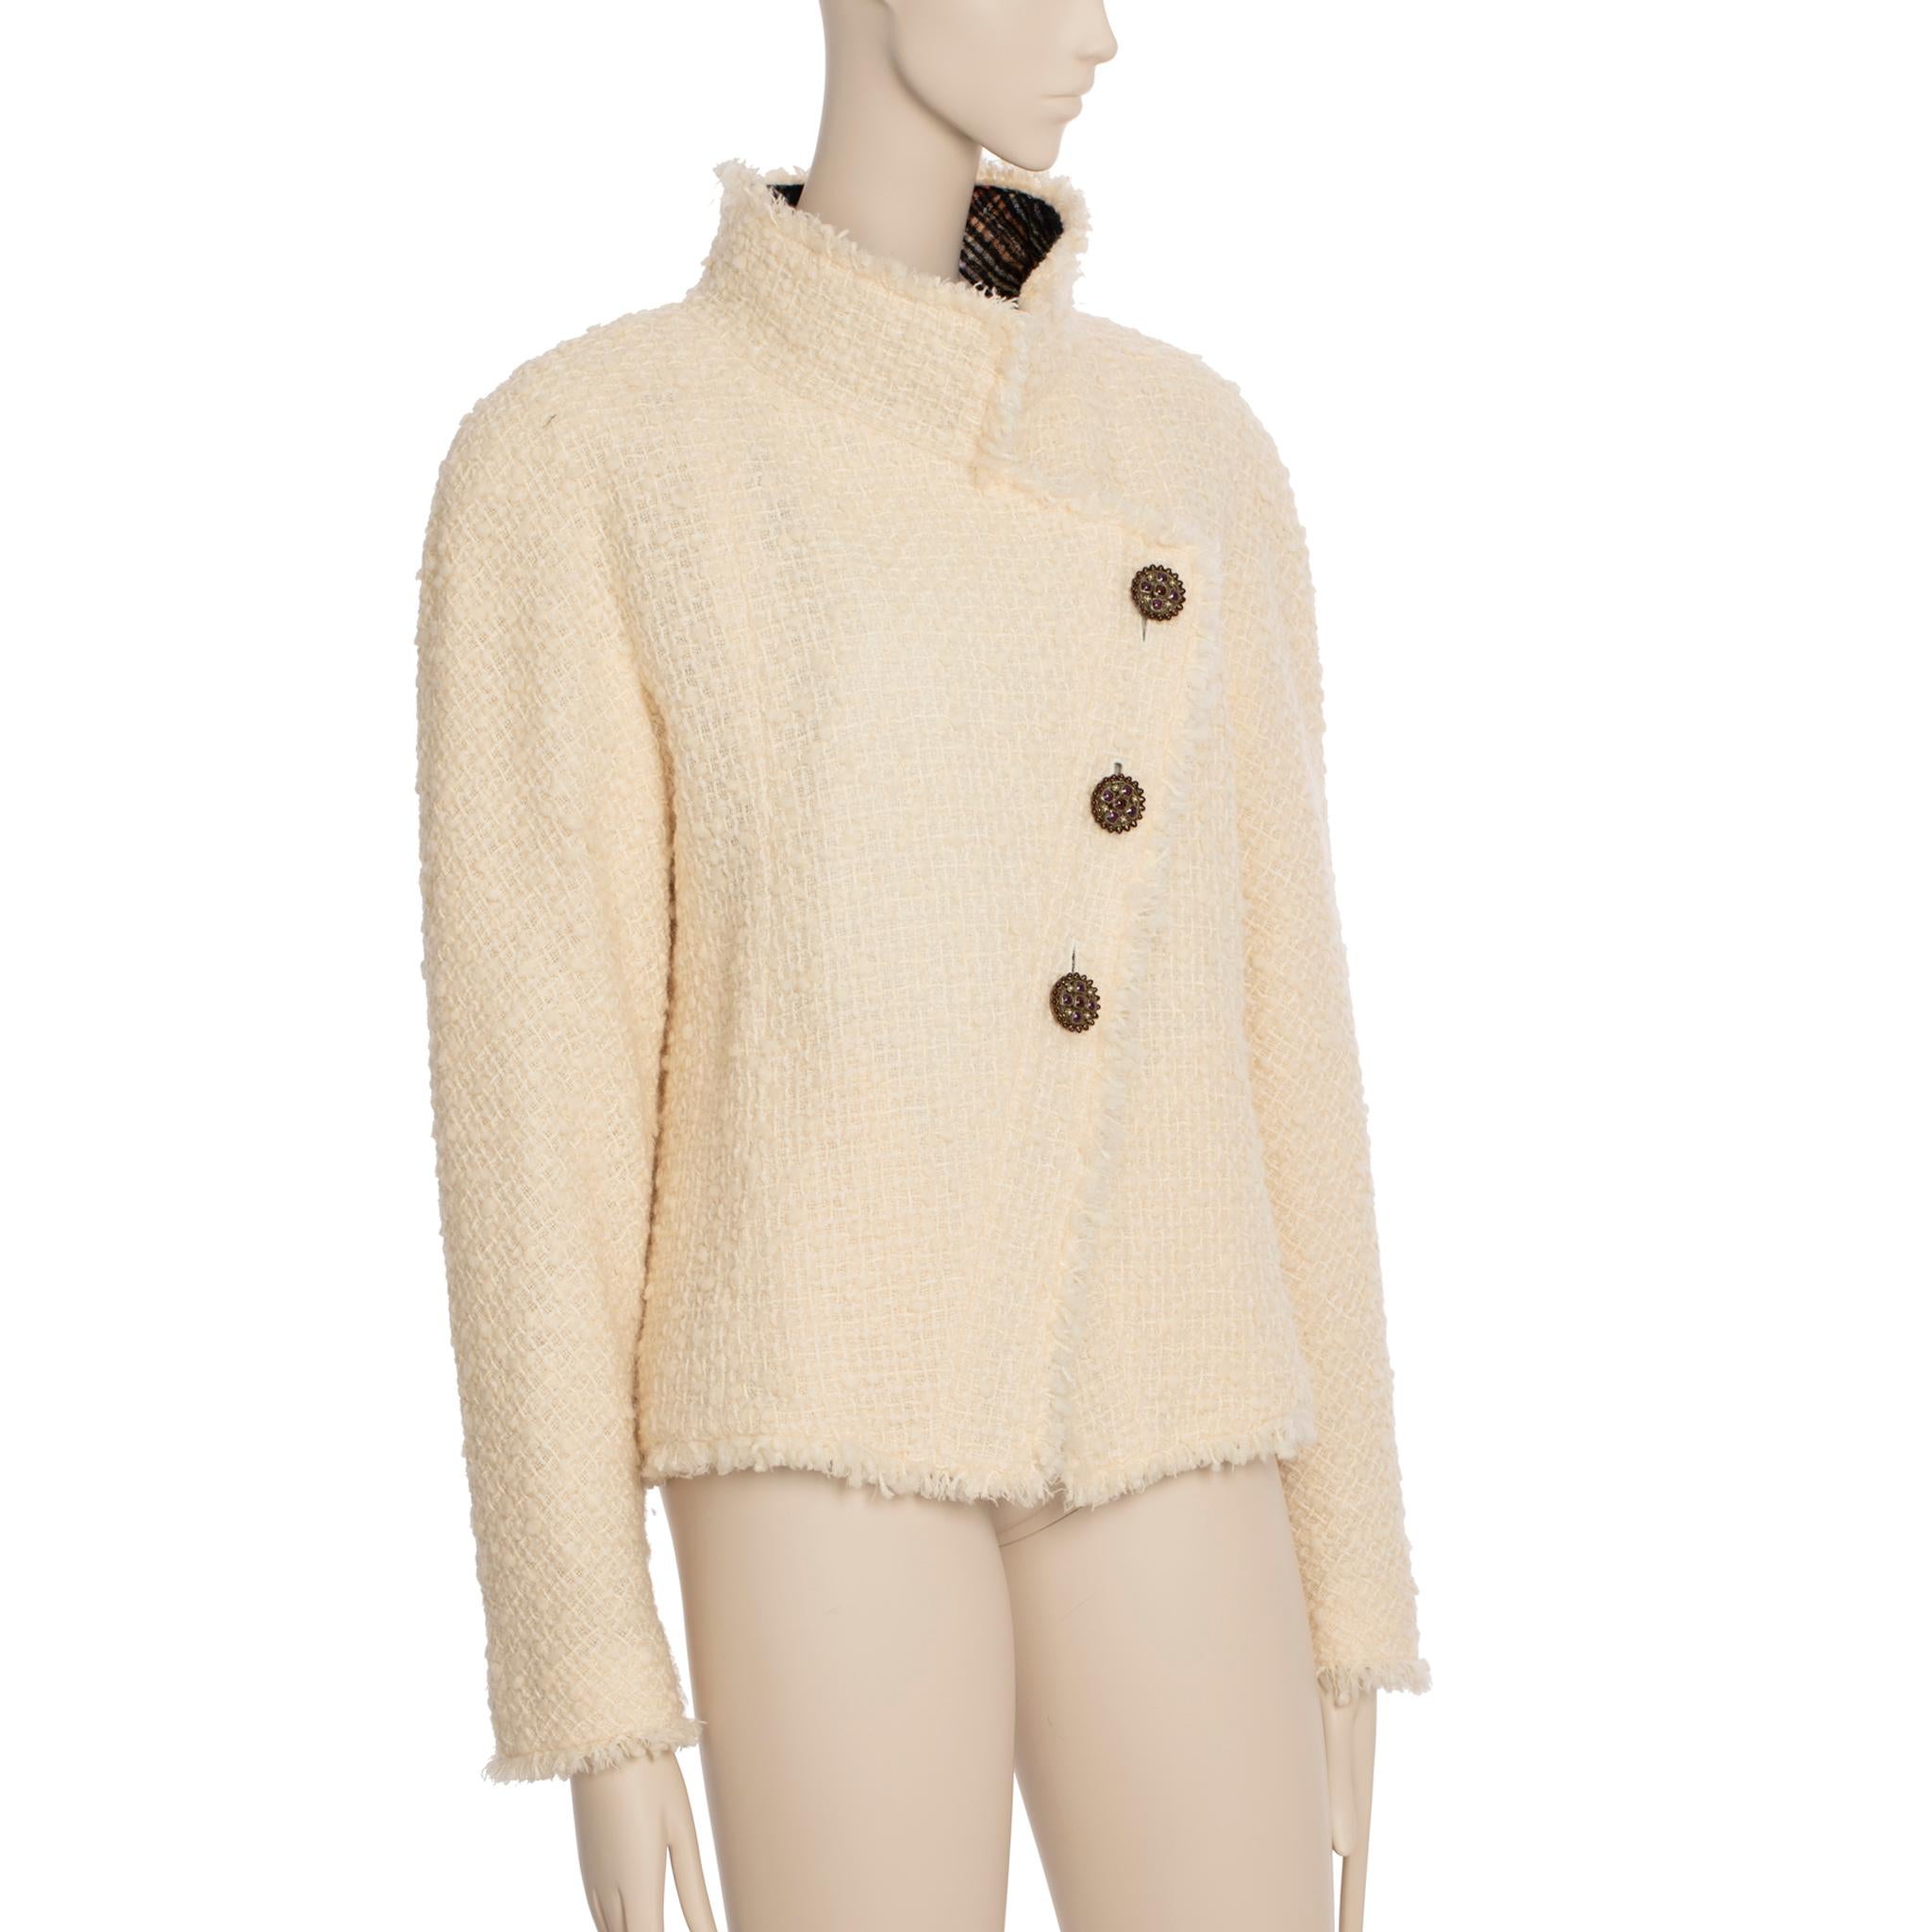 This Chanel Cream Tweed Jacket is the perfect winter companion. Crafted with a soft tweed exterior and a plaid lining, it is designed to keep you warm and stylish. 

Brand: Chanel

Product: Tweed Jacket

Size: 42 Fr

Colour: Ivory

Material:

Outer: